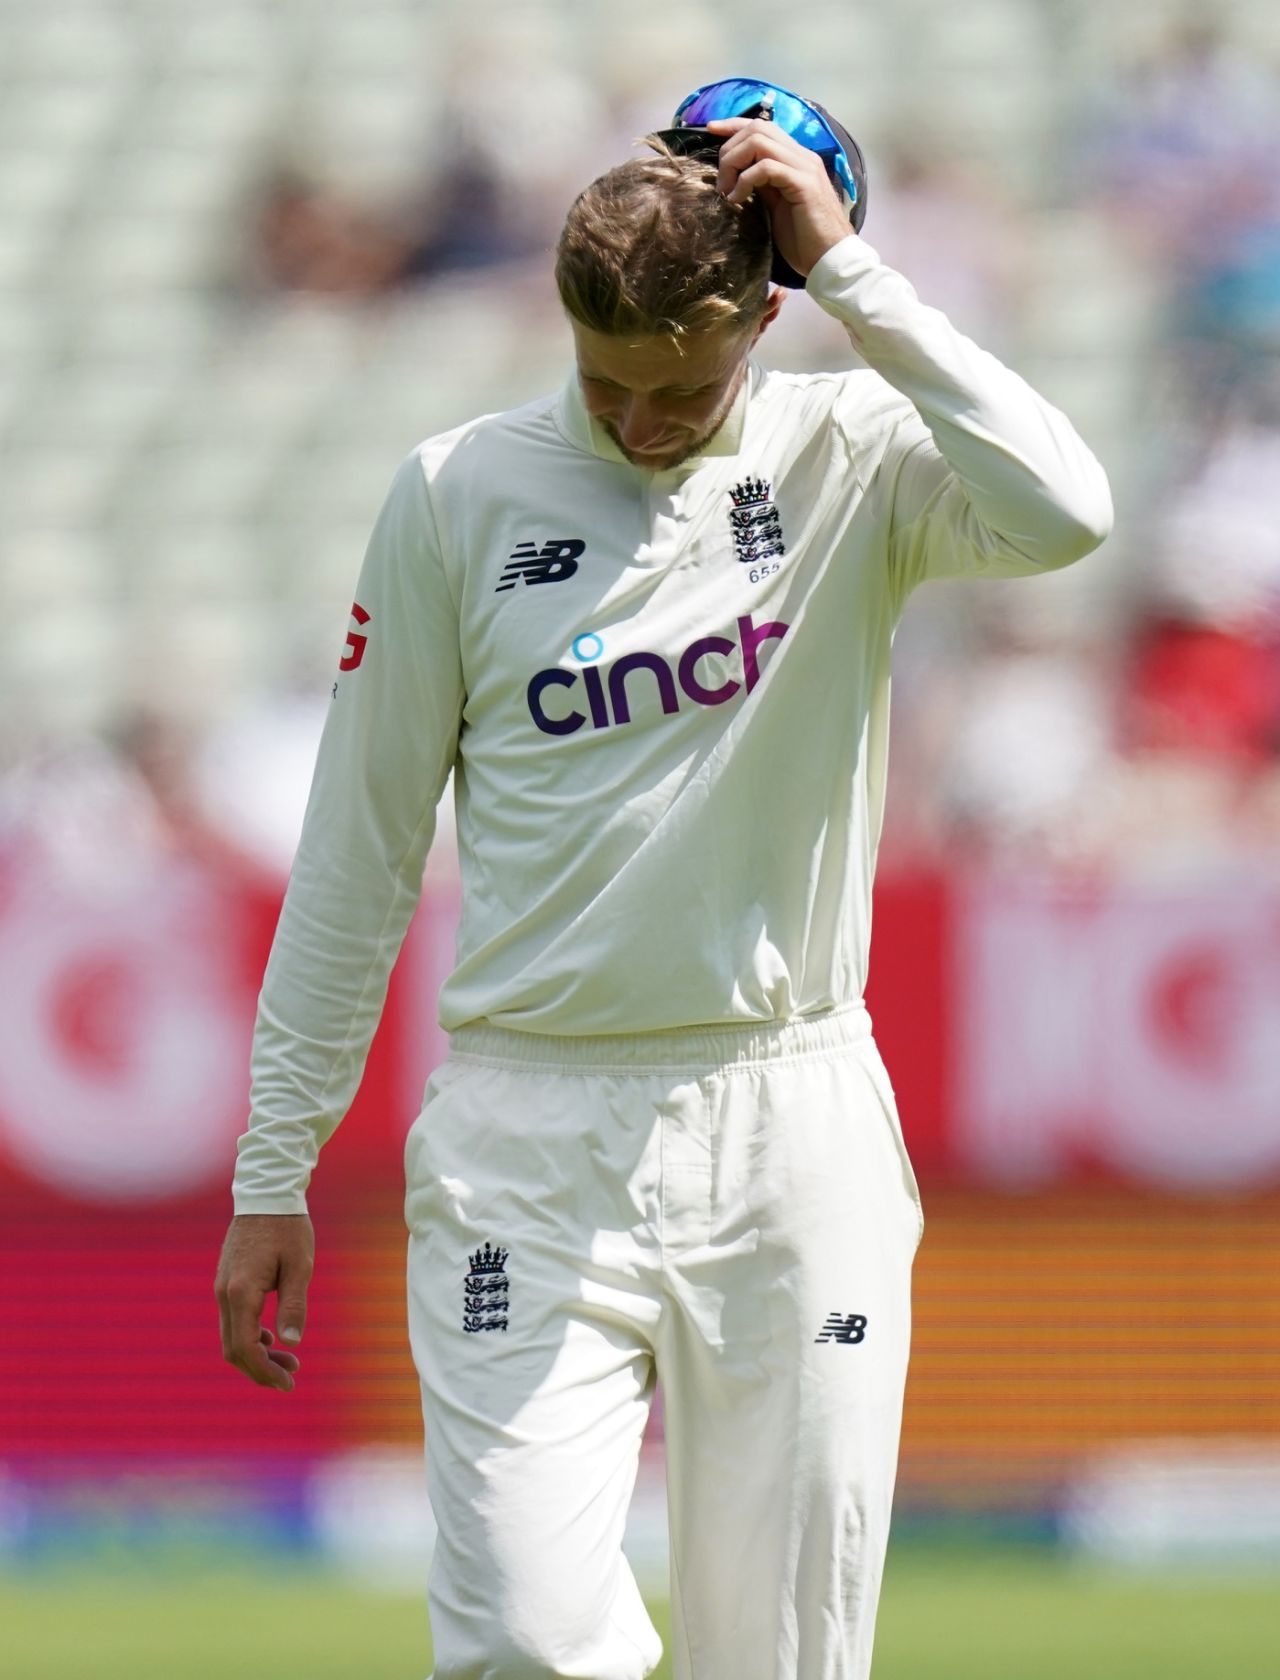 Joe Root reacts on the field, England vs New Zealand, 2nd Test, Birmingham, 4th day, June 13, 2021